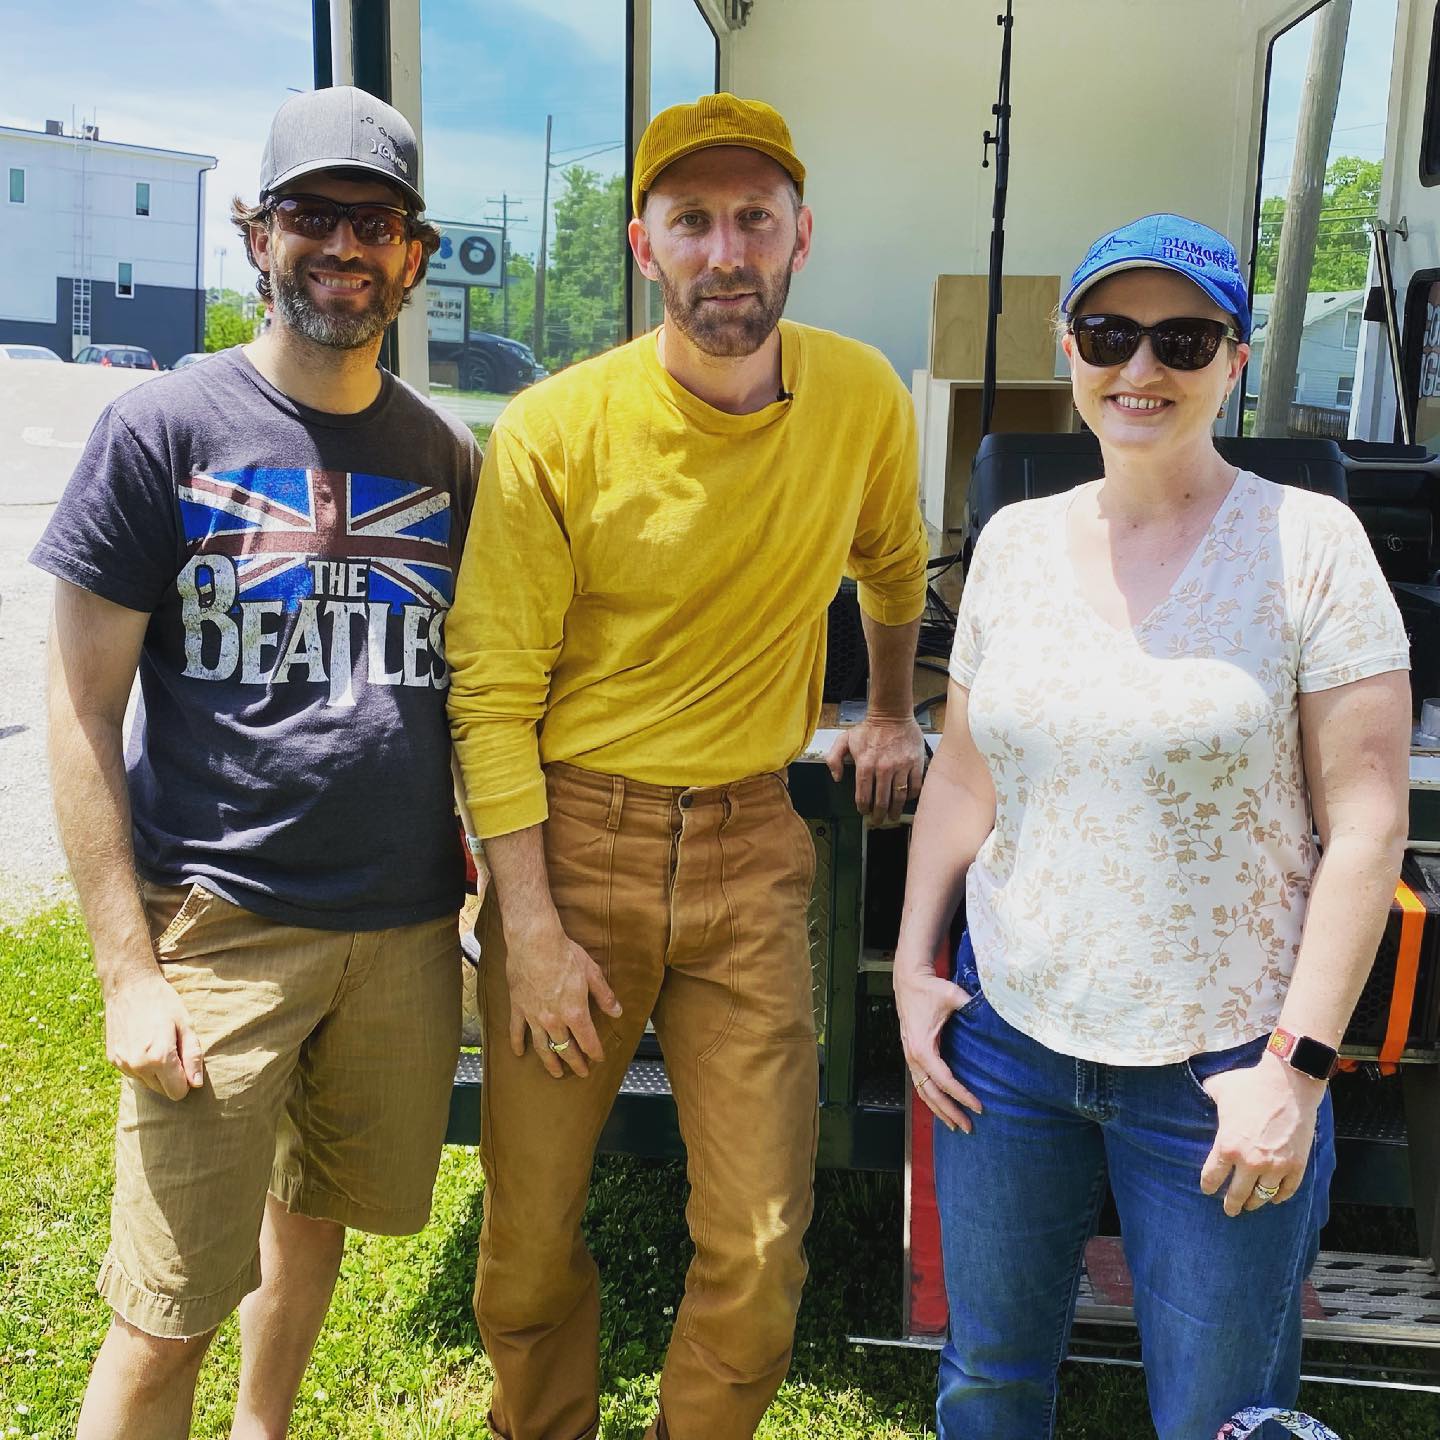 Took a break this afternoon to catch @matkearney perform a set from the back of a box truck in the parking lot at @grimeys. He is such a great performer and his new album is fantastic. Also…this is the third time I’ve had the opportunity to meet him and he is always so nice and personable. #music #livemusic